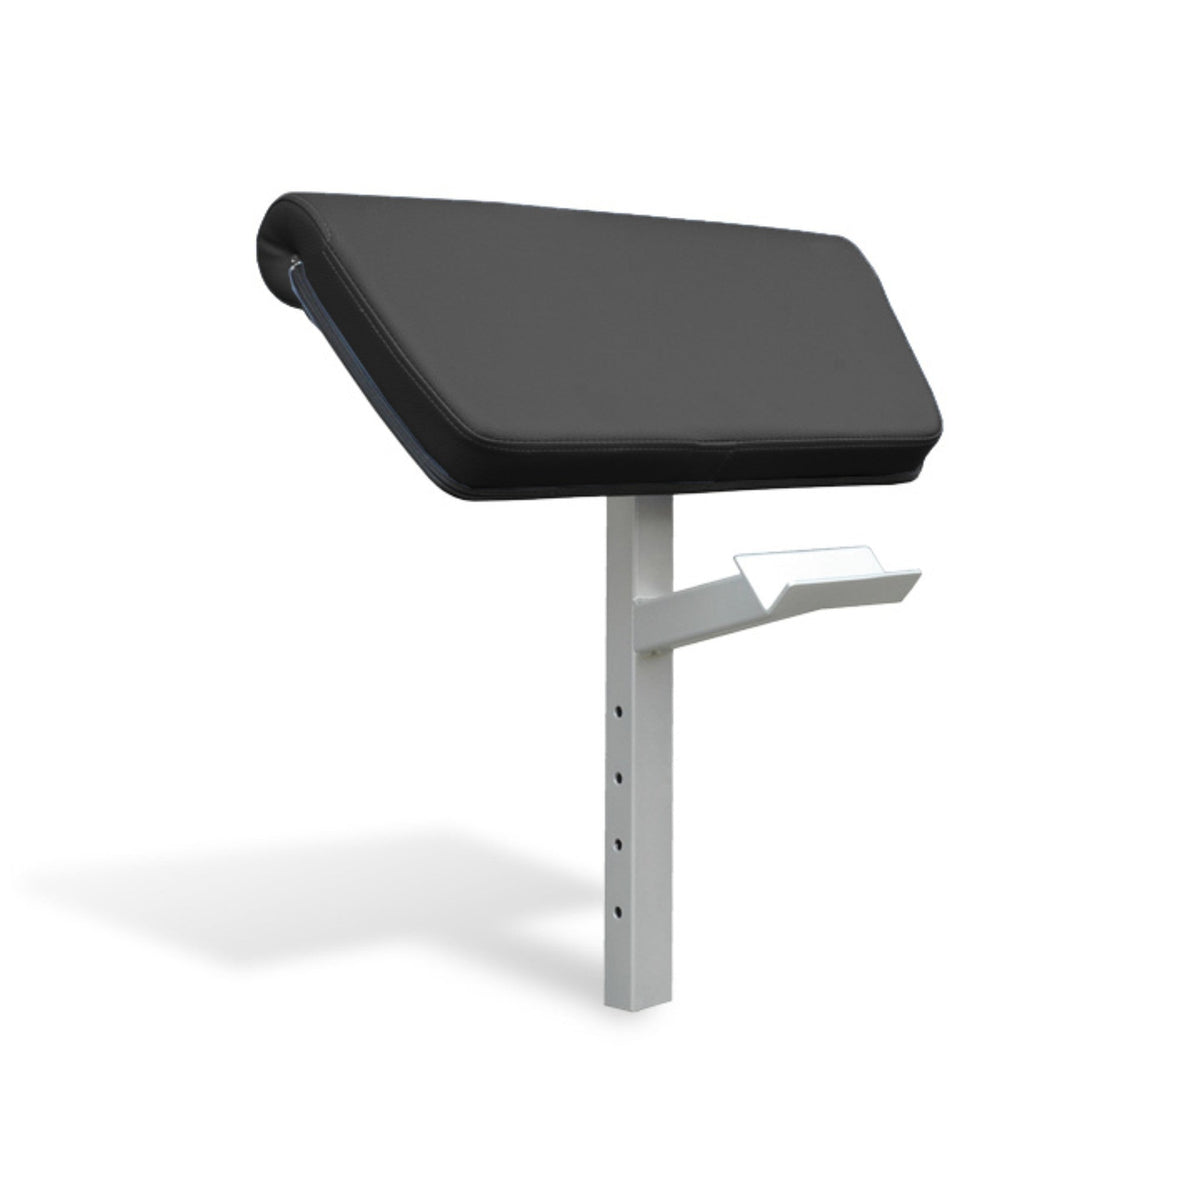 Ultimate Impulse Series FID Bench - Fitness Experience